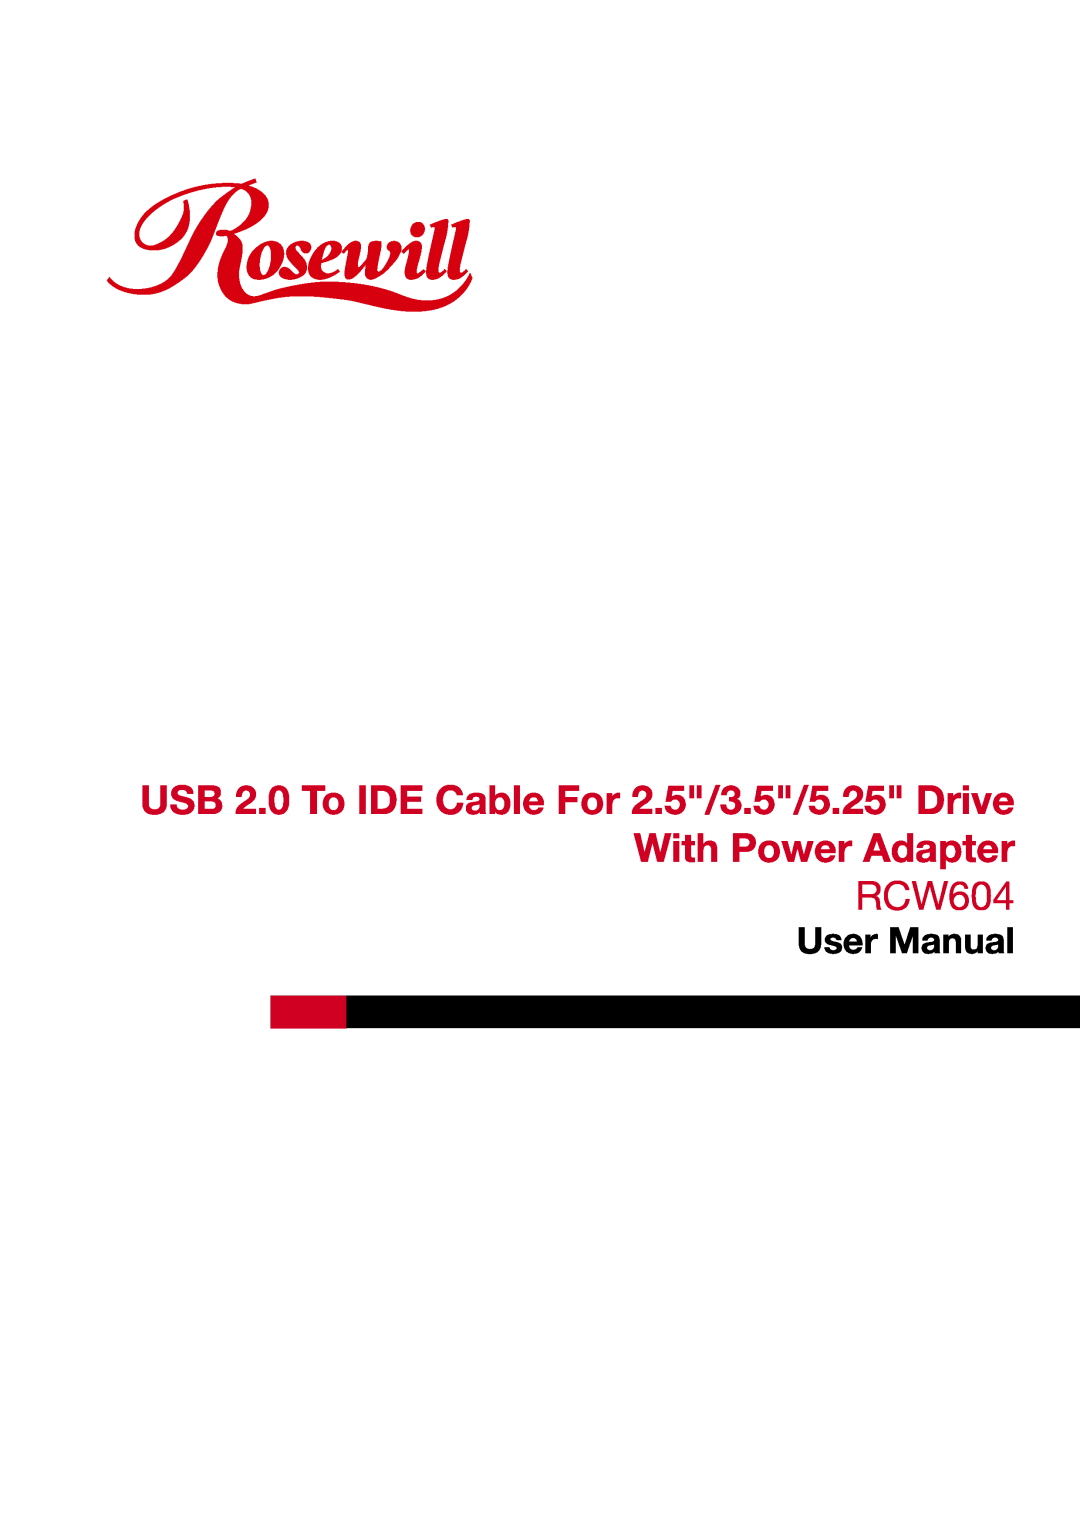 Rosewill RCW604 user manual USB 2.0 To IDE Cable For 2.5/3.5/5.25 Drive With Power Adapter, User Manual 